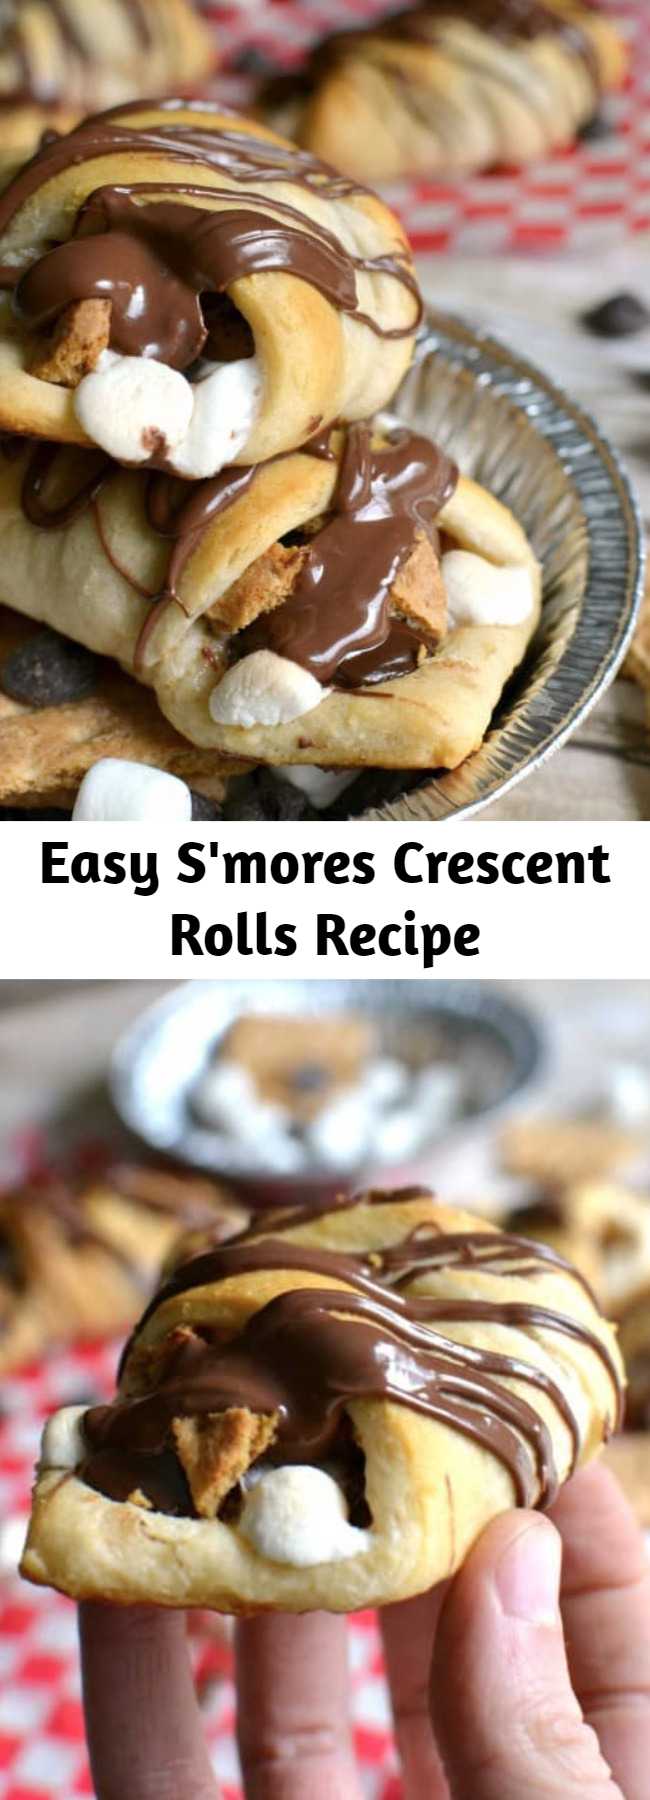 Easy S'mores Crescent Rolls Recipe - S'mores Crescent Rolls stuffed with chocolate chips, marshmallows, graham crackers and Nutella and topped with Nutella drizzle. Our favorite new way to enjoy s'mores!